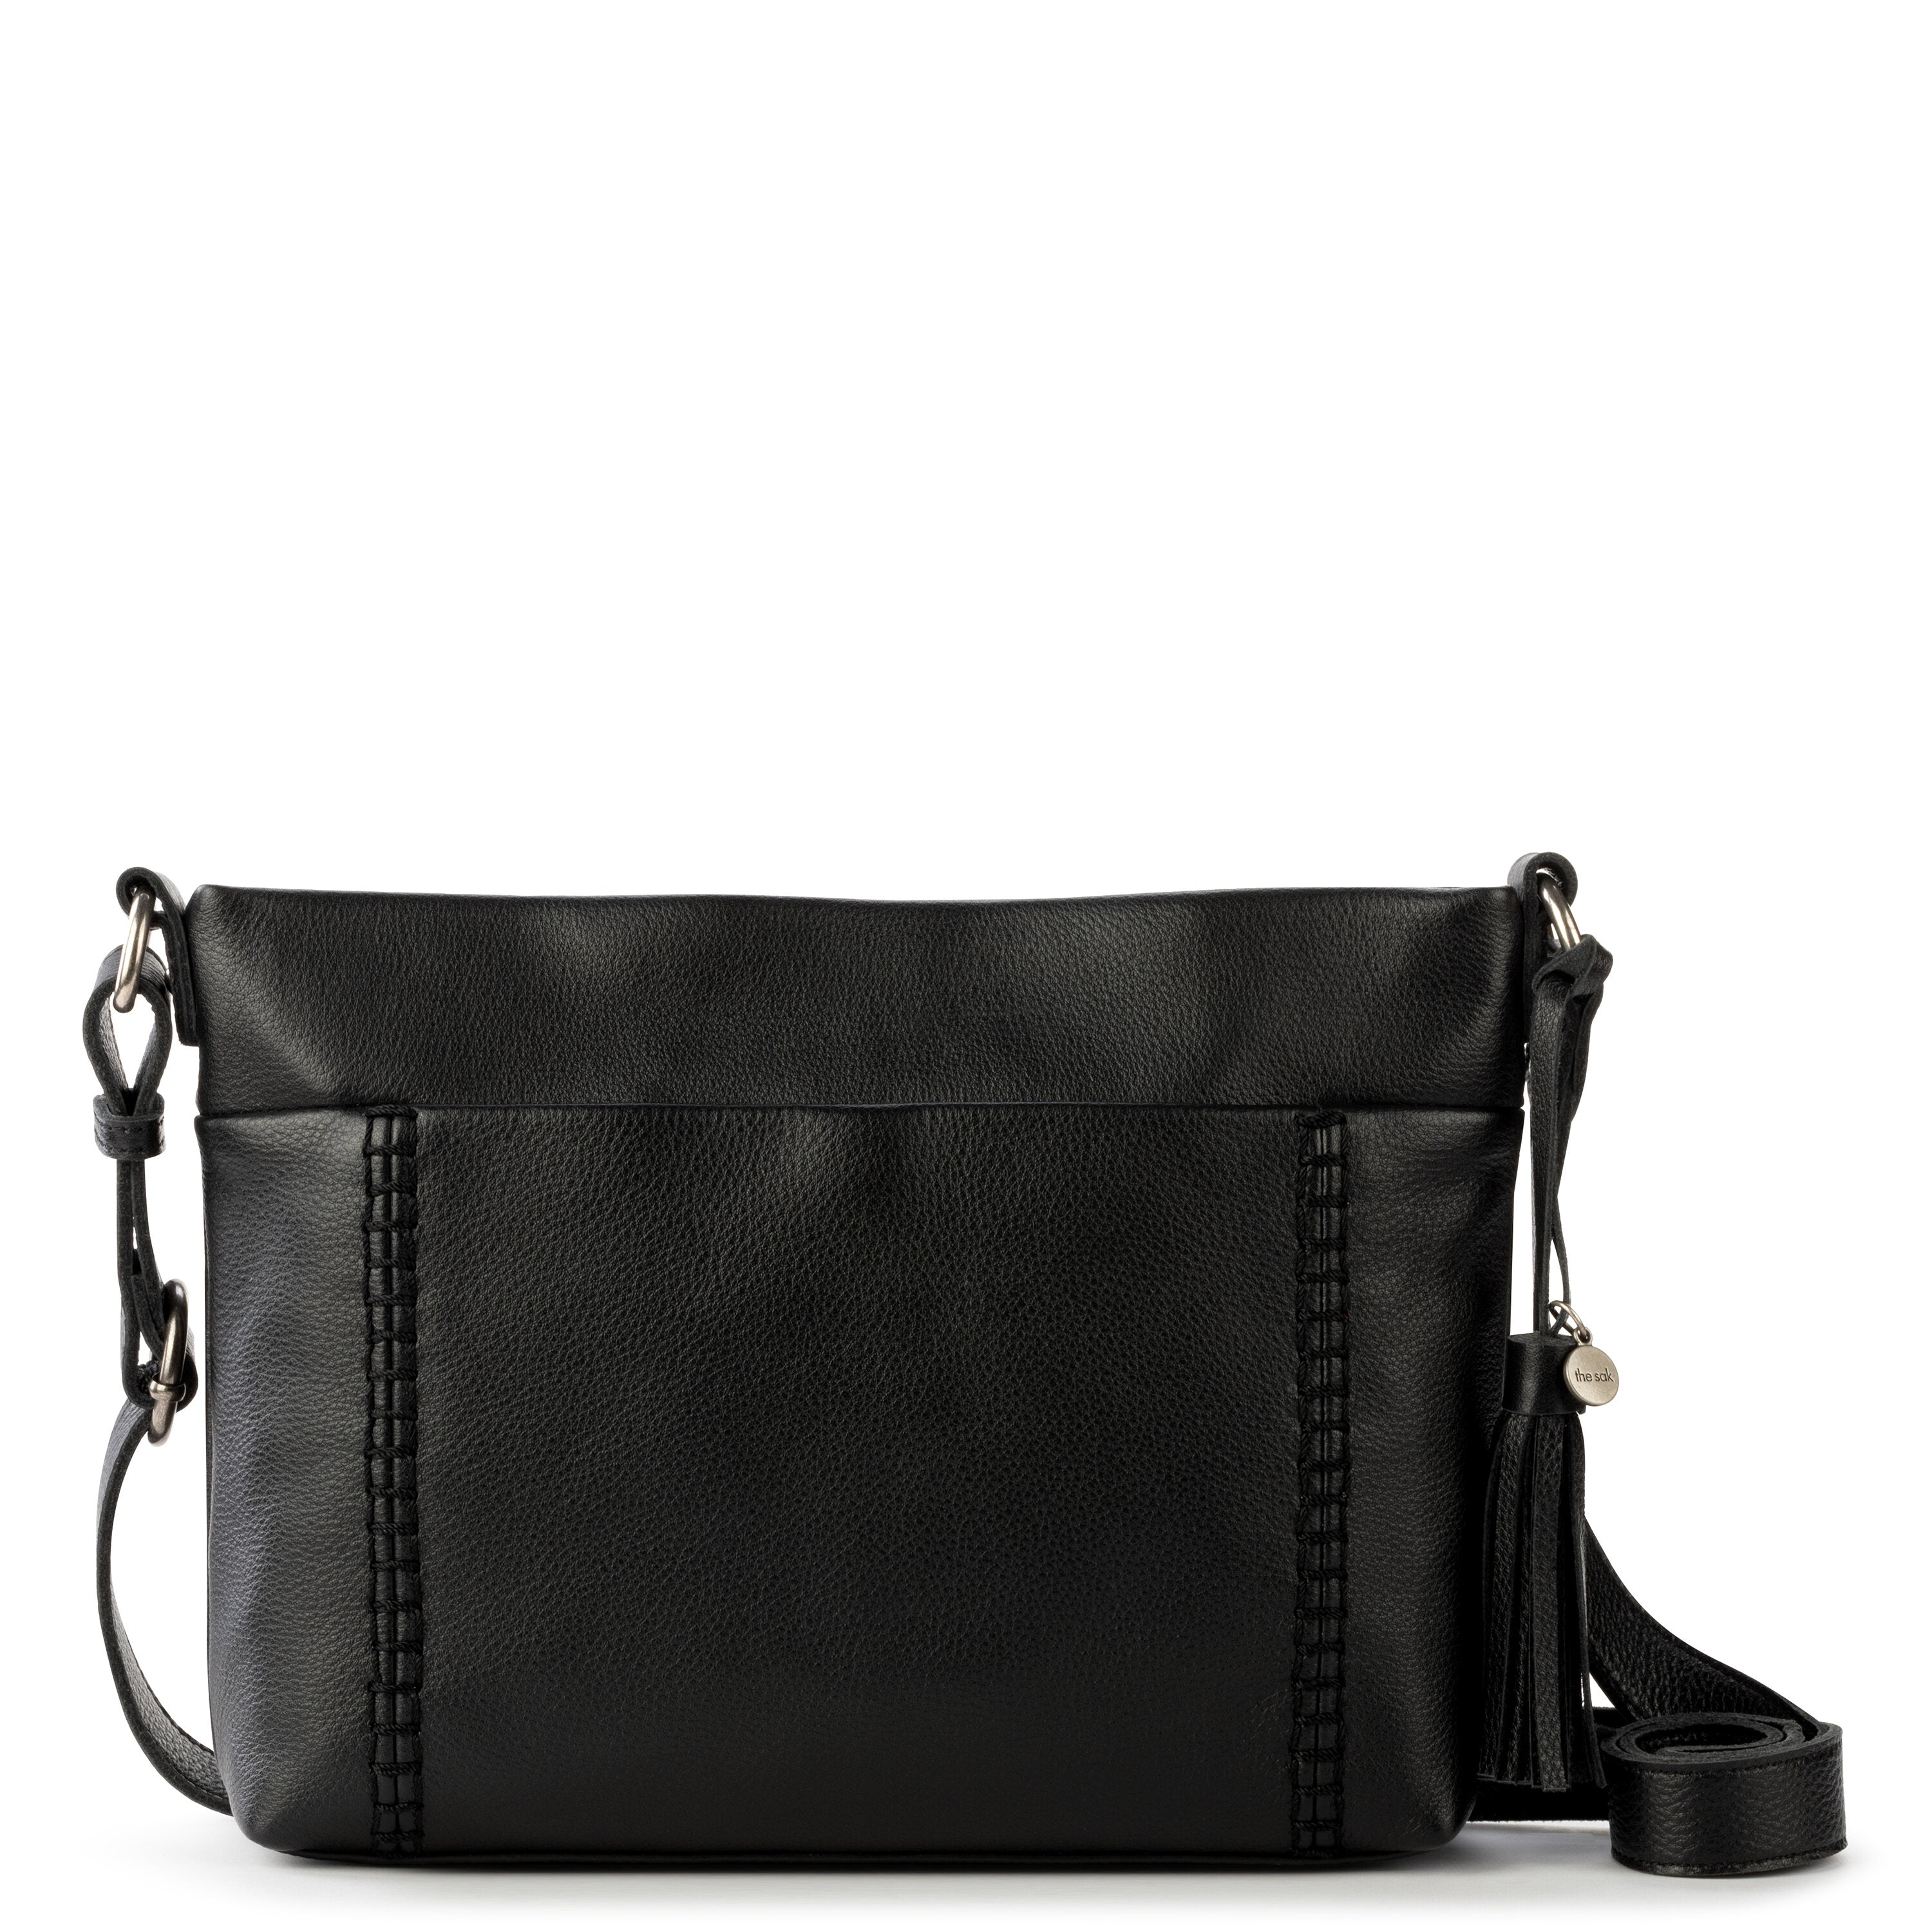 Personalized Leather Crossbody Bags for Women | Leatherology